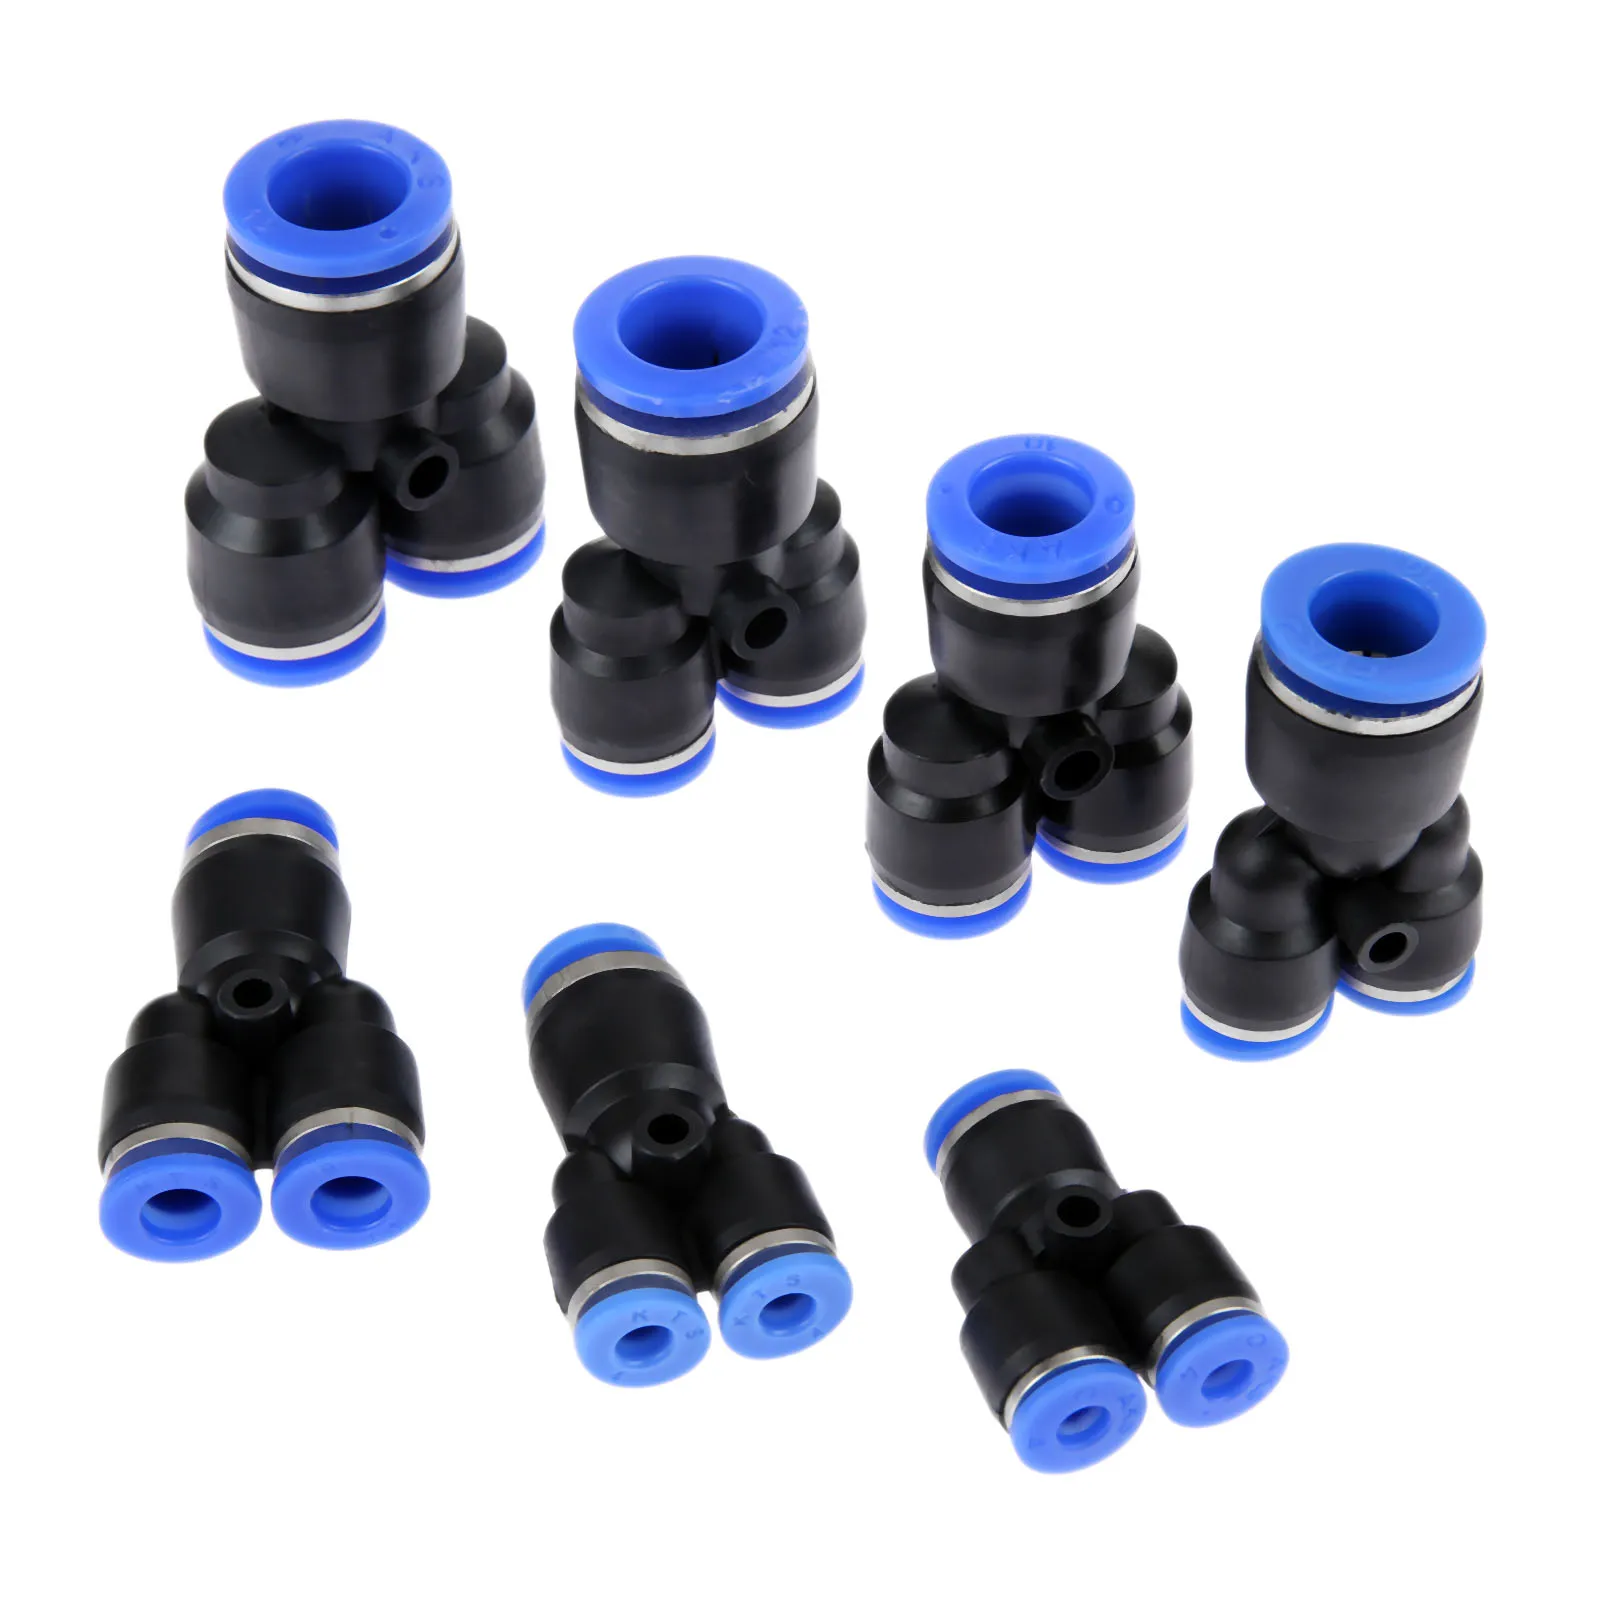 5Pcs Pneumatic Tee 3 Way Push In Air Fitting Quick Fittings Connector Adapters 